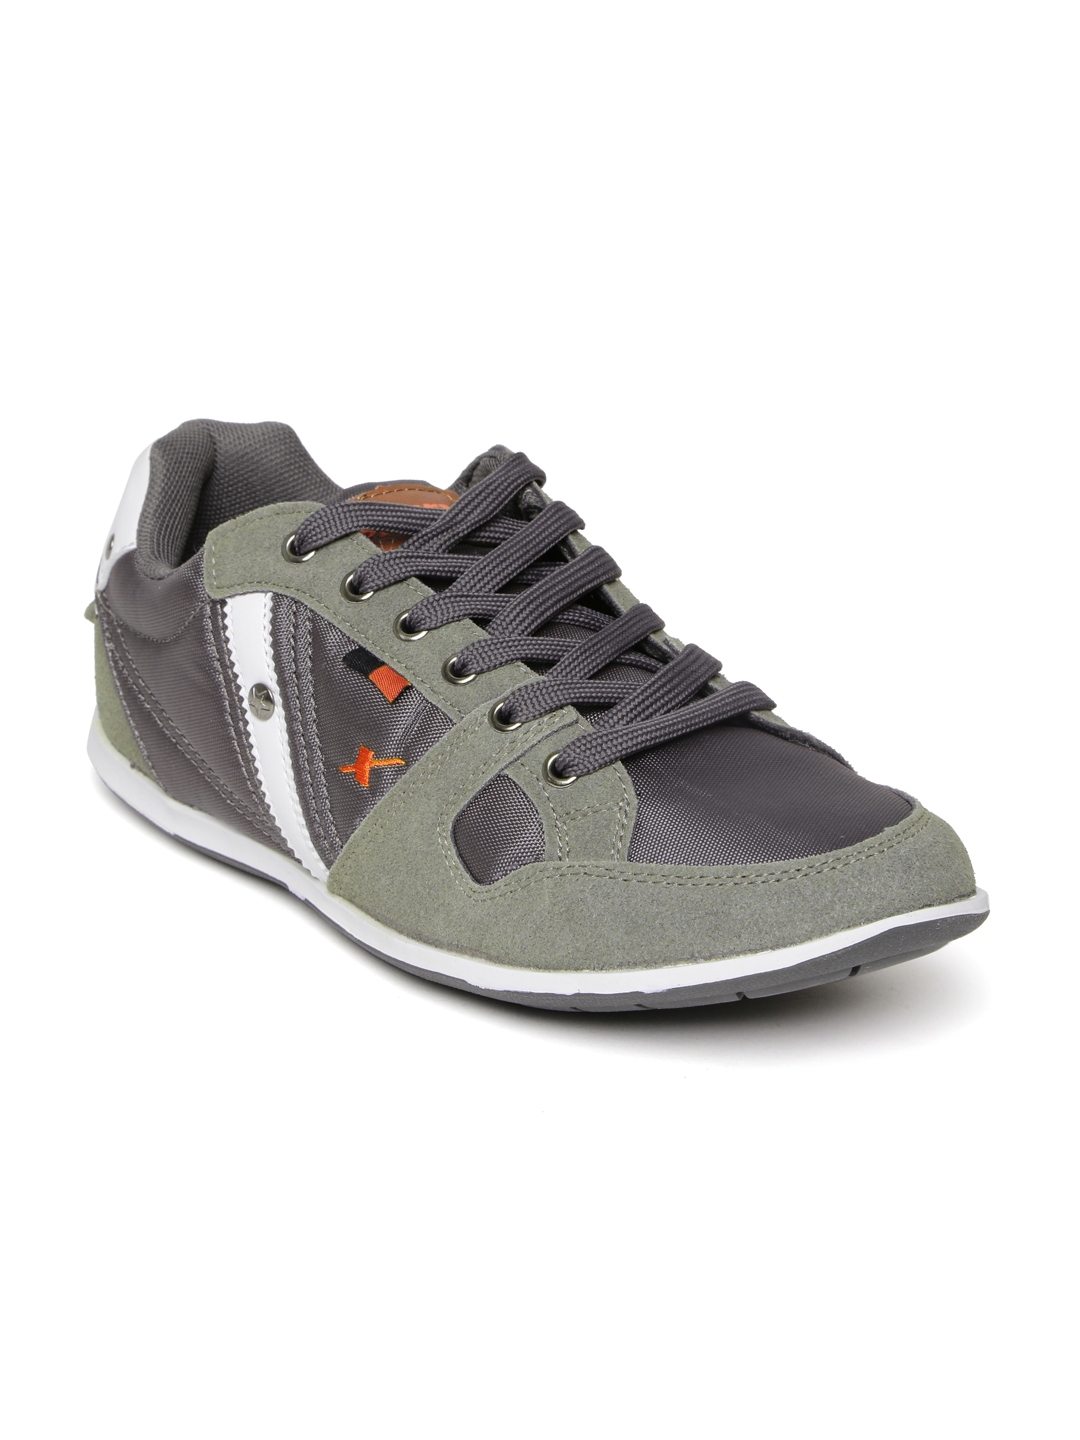 sparx olive green shoes